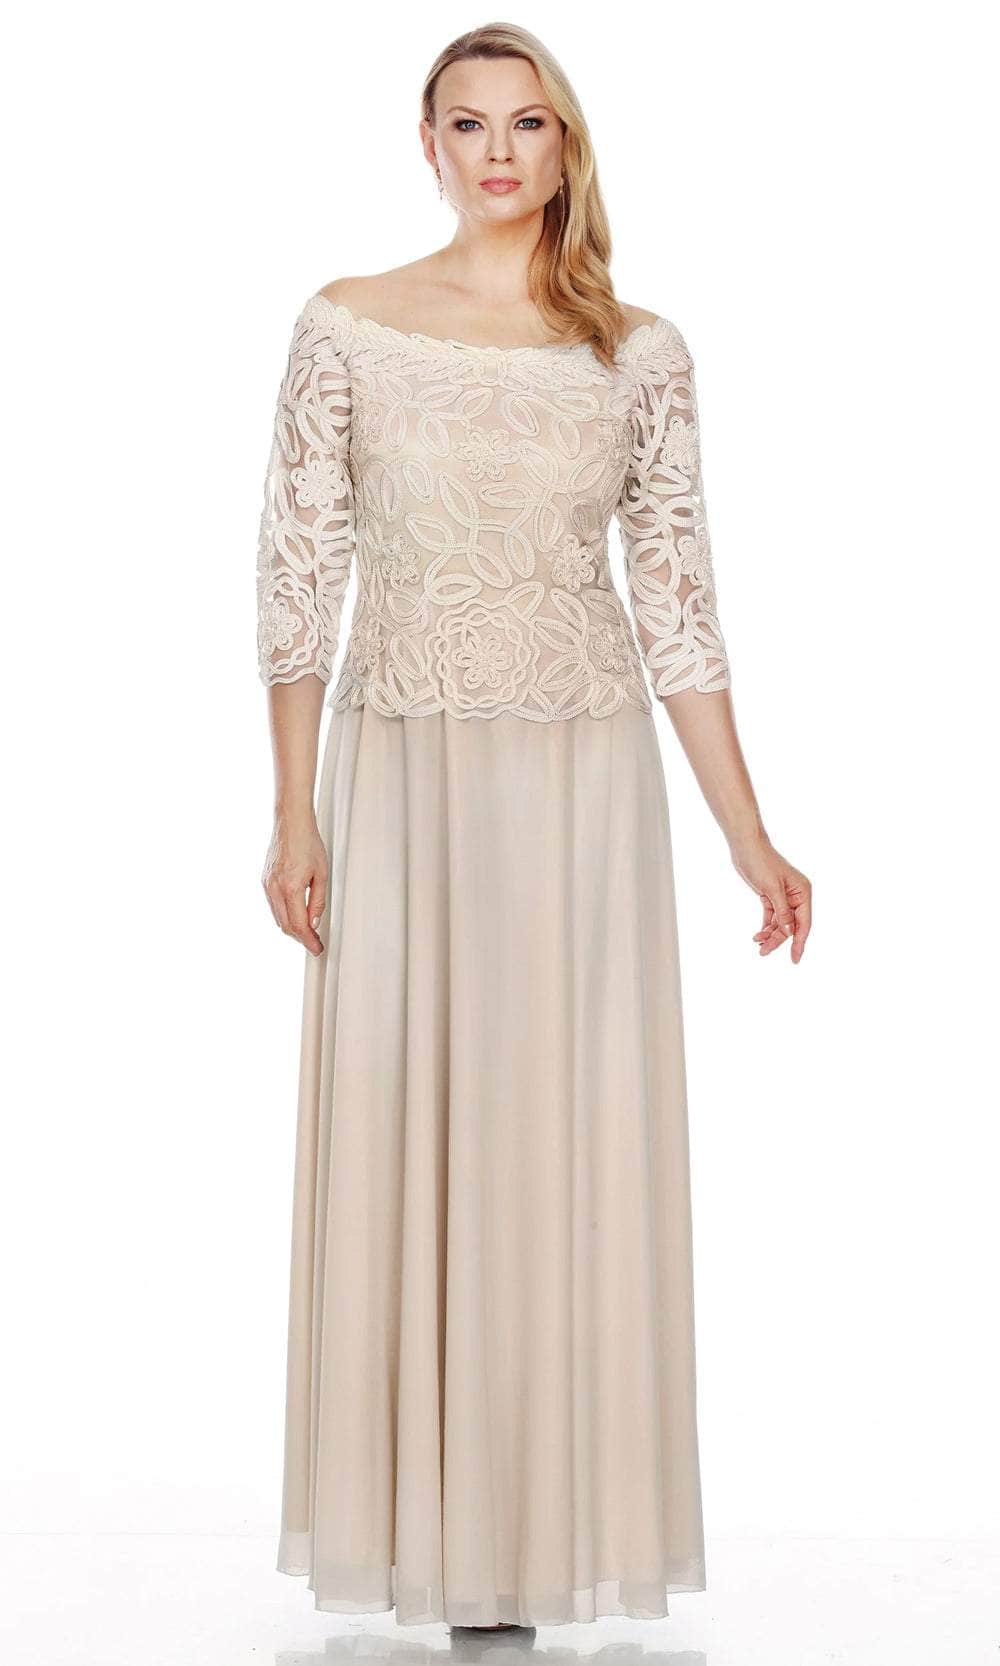 Soulmates 1614 - Off Shoulder 3/4 Sleeve Evening Gown Evening Dresses Champagne / S